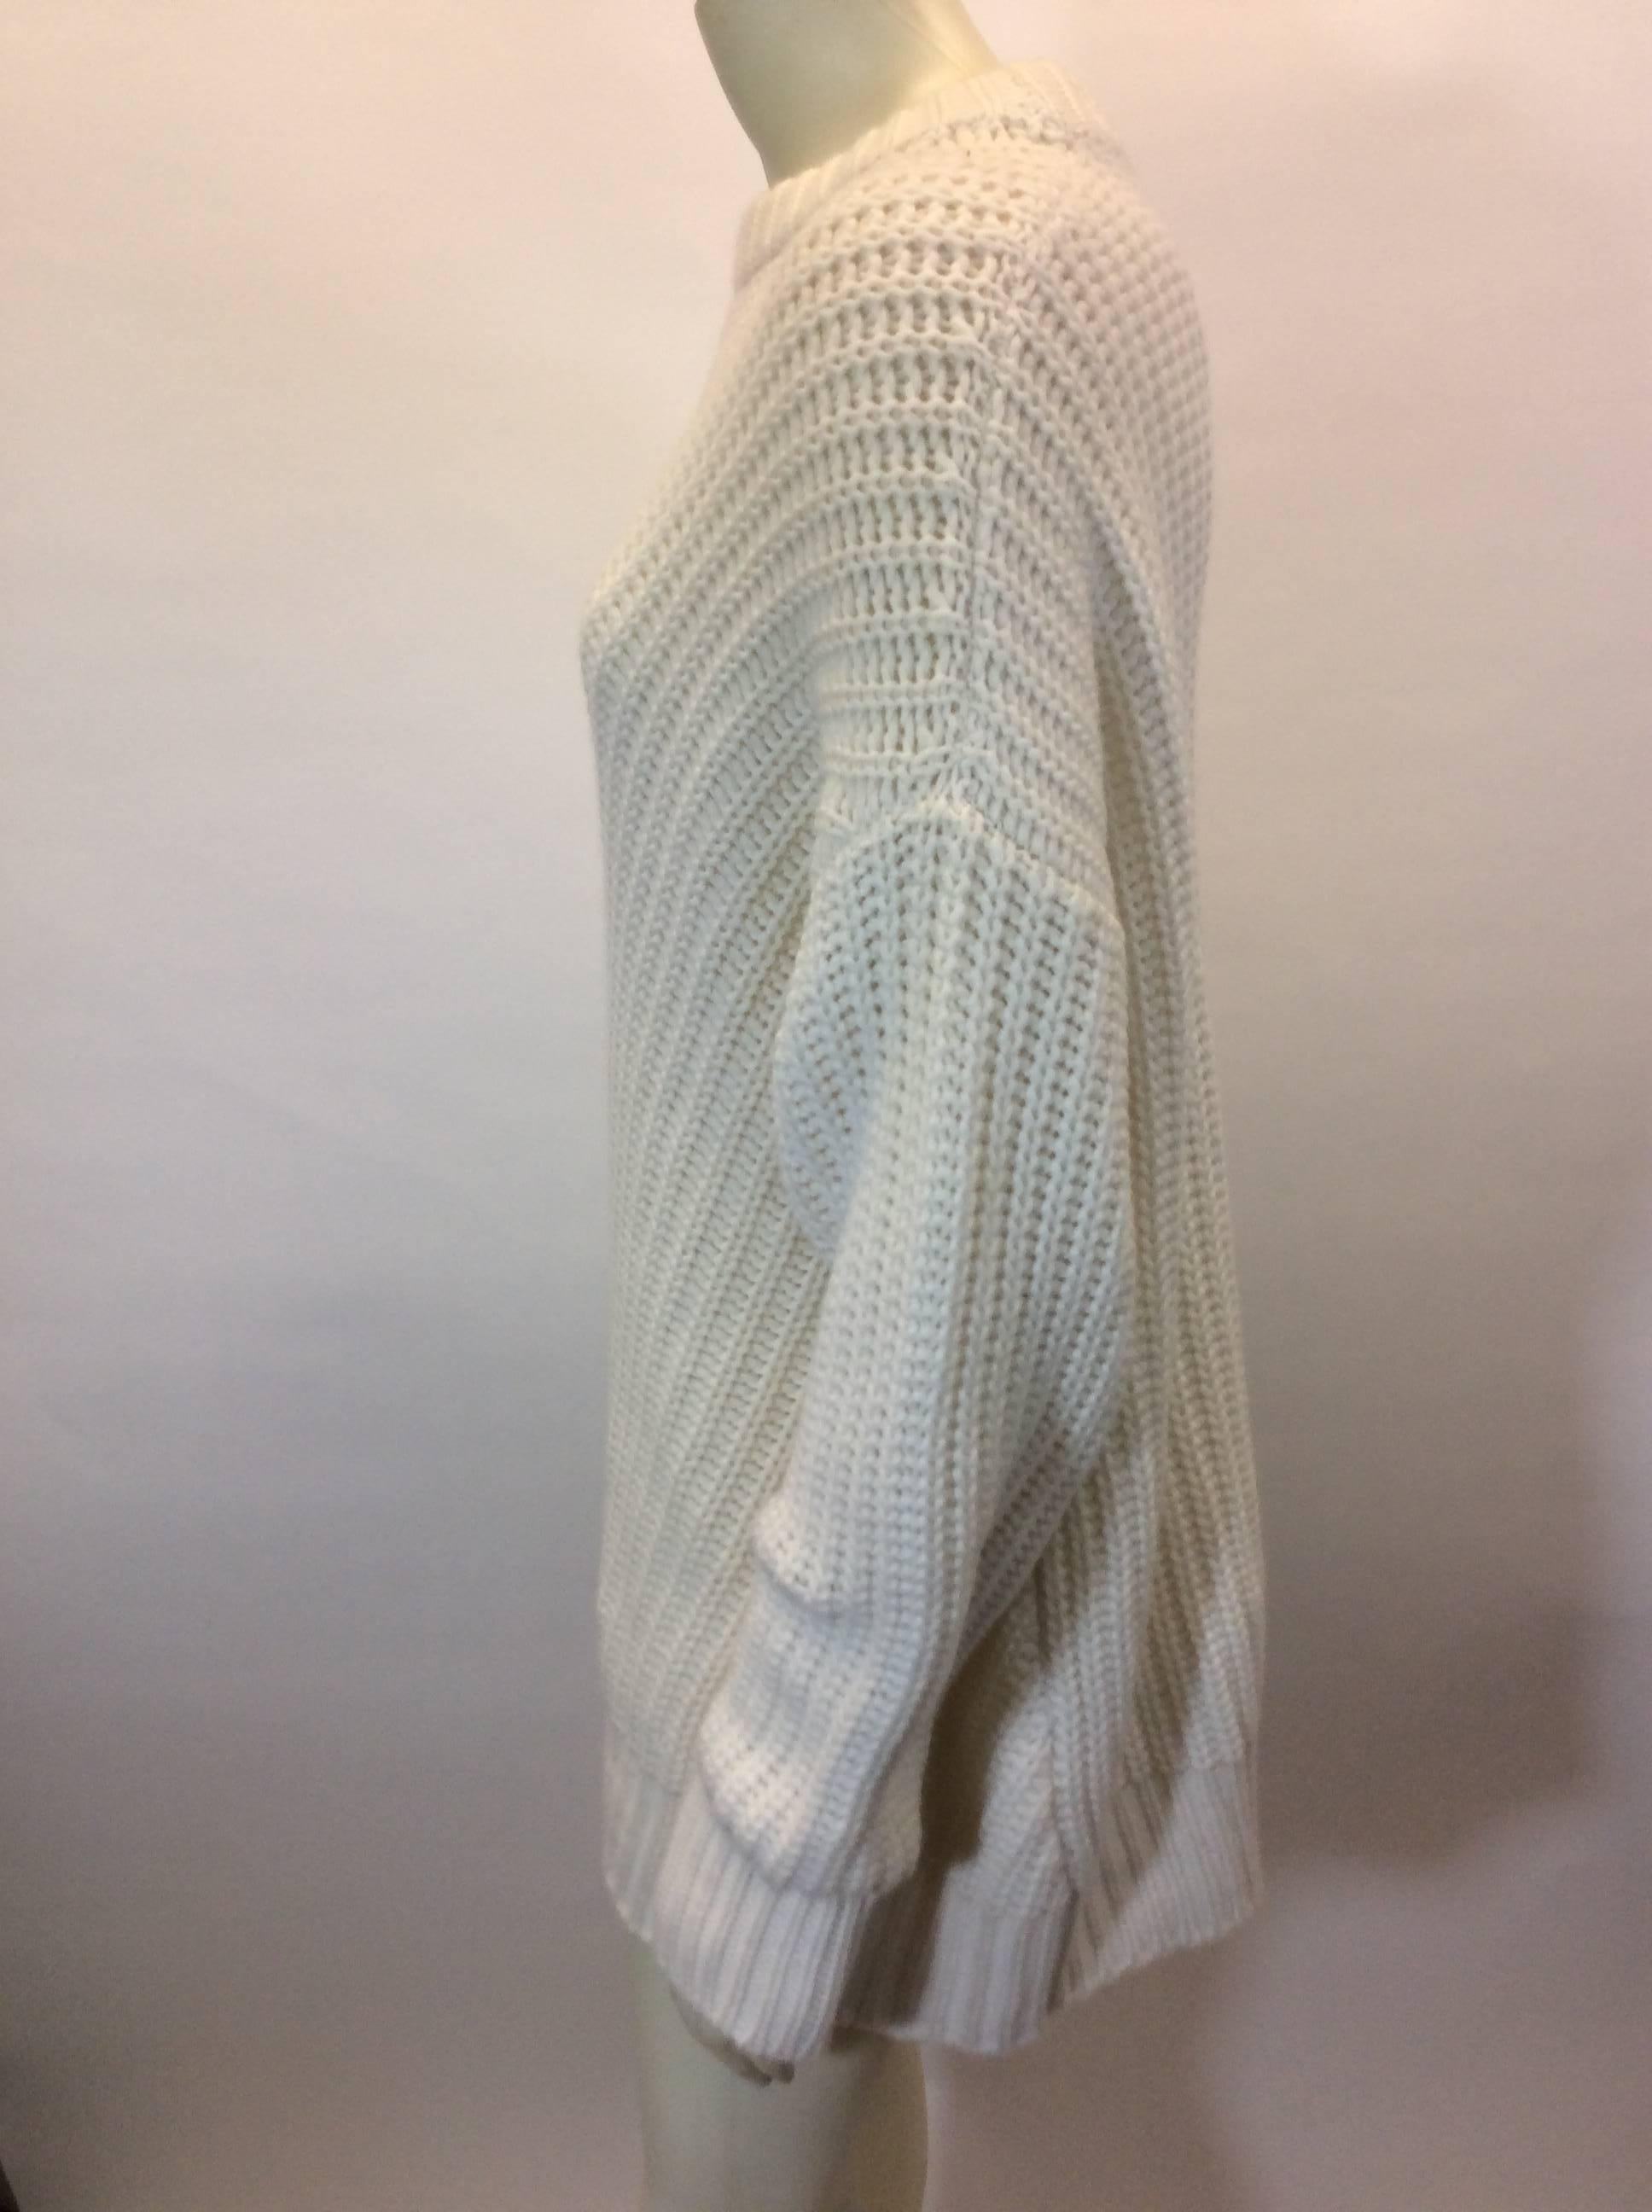 White Knit Oversized Sweater
Ribbed collar, cuff, and hem
Diagonal knit design on front of sweater
Size Small
100% Cashmere